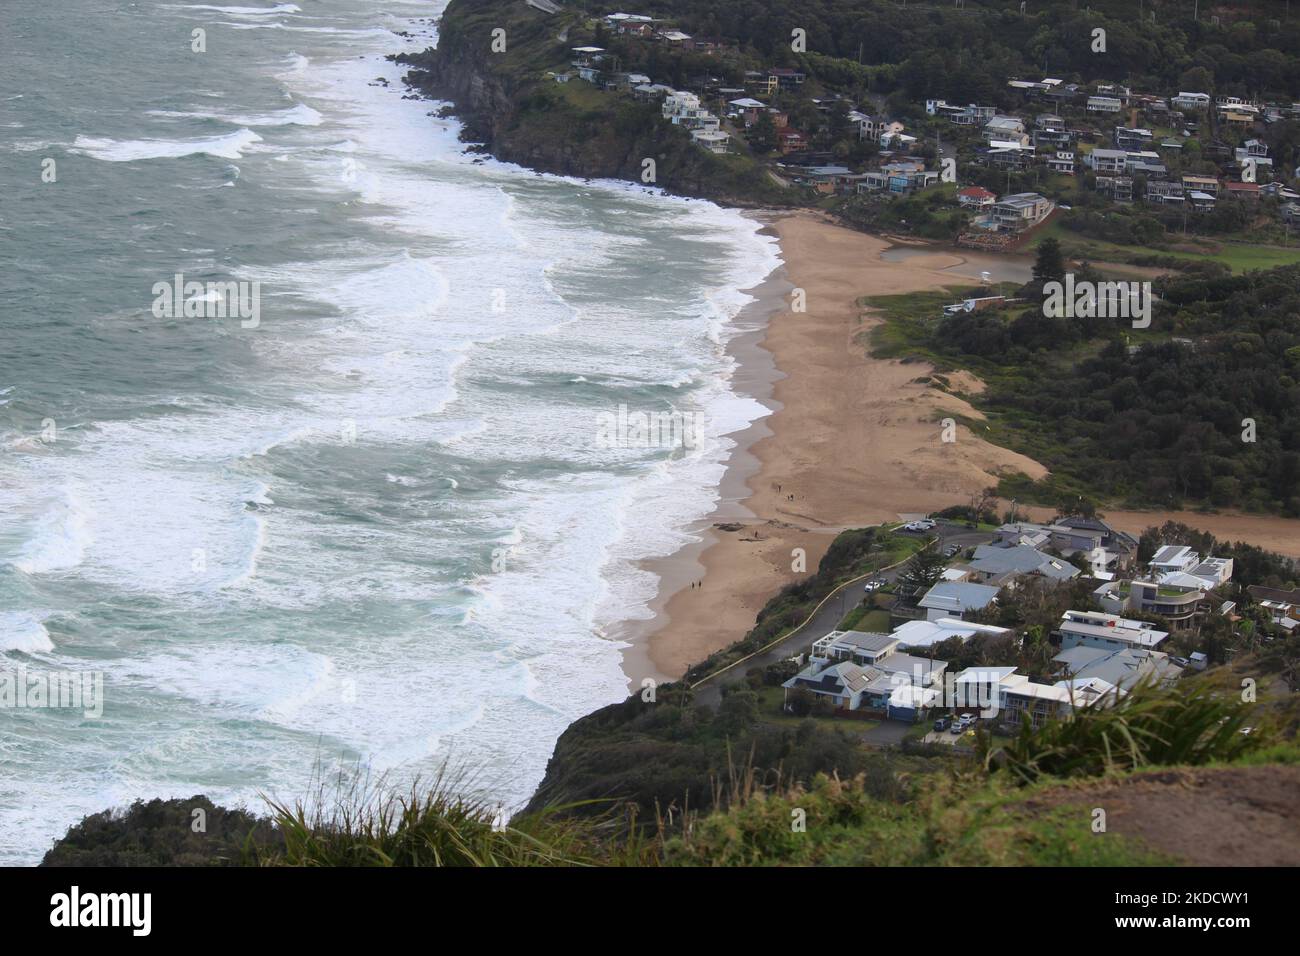 A high-angle of a Bald Hill lookout with a sandy beach seascape and resort view Stock Photo